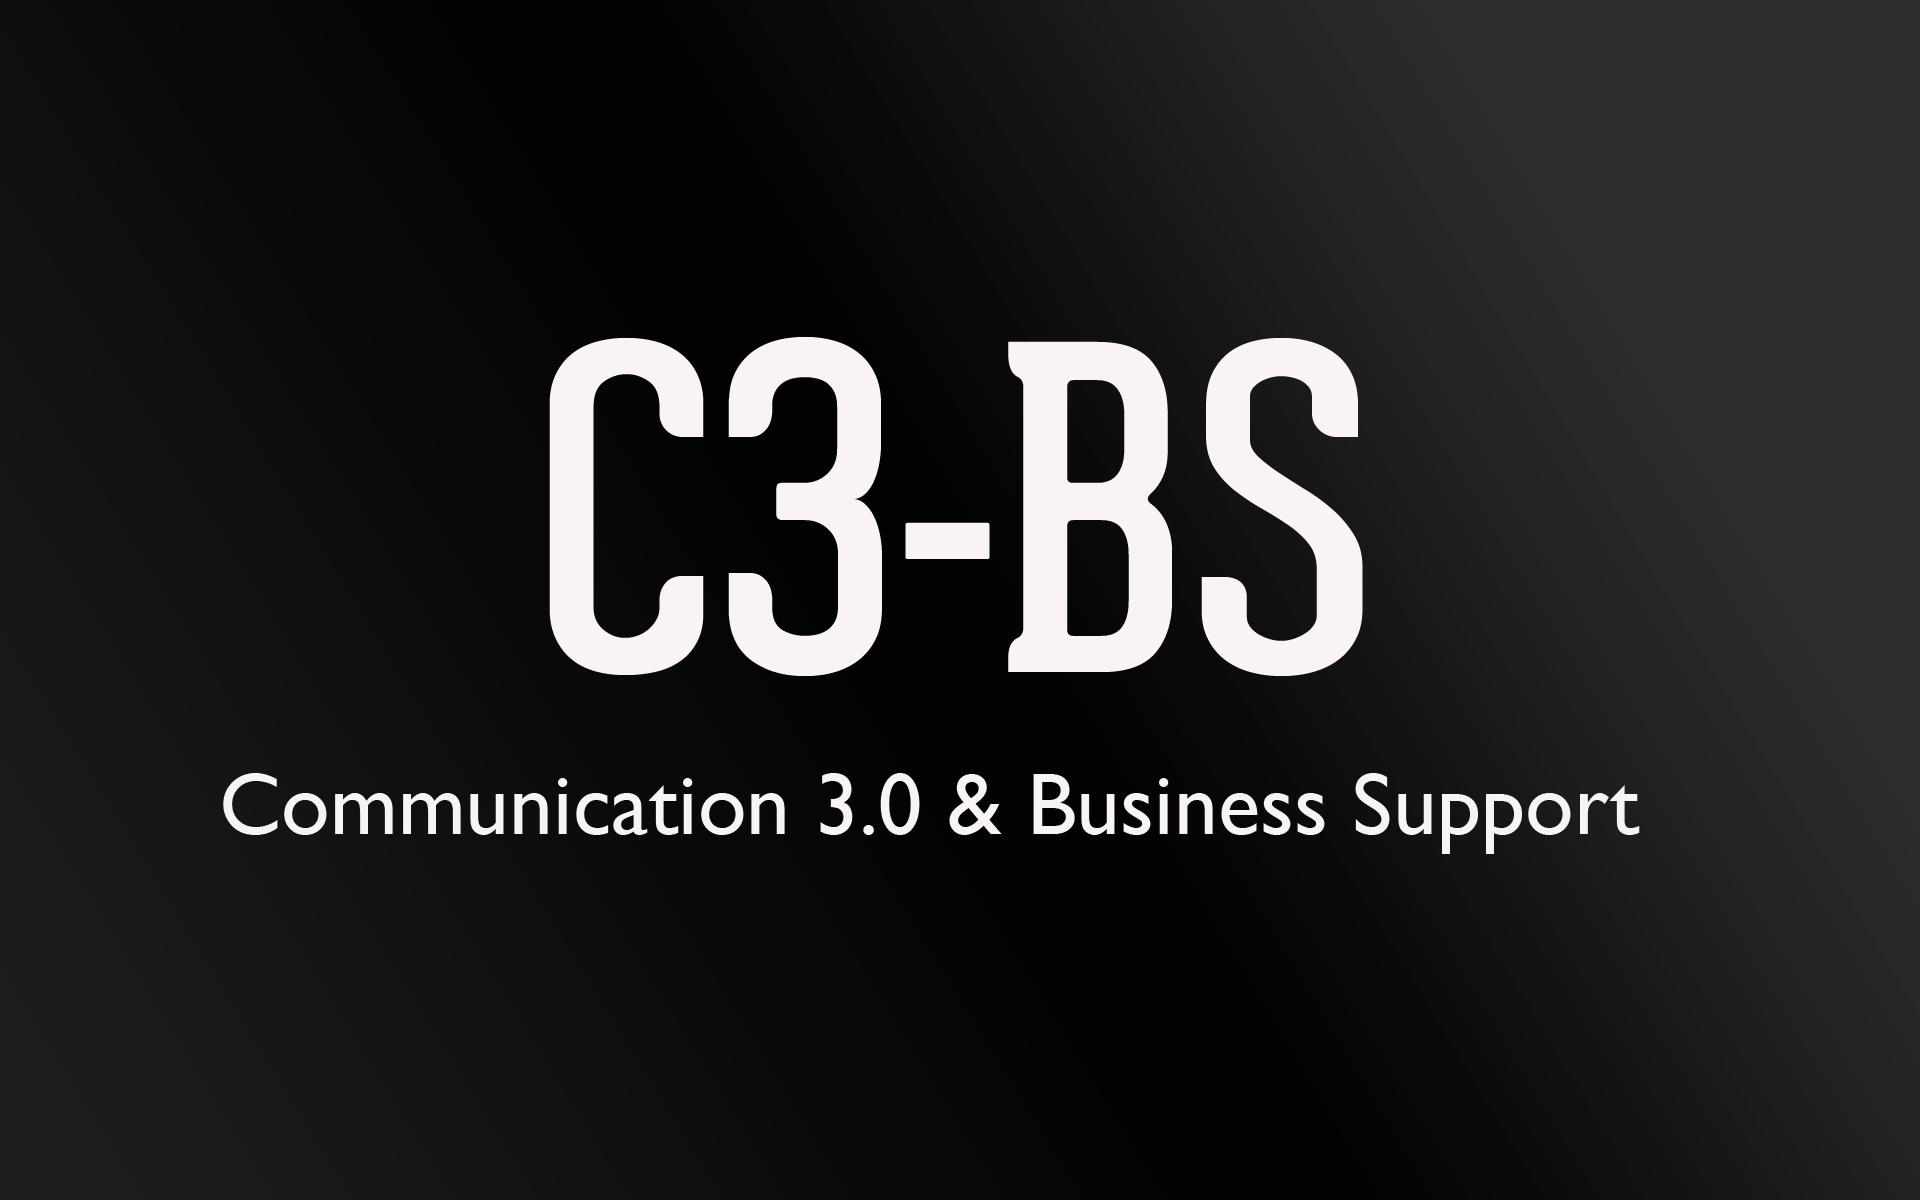 Communication 3.0 and Business Support